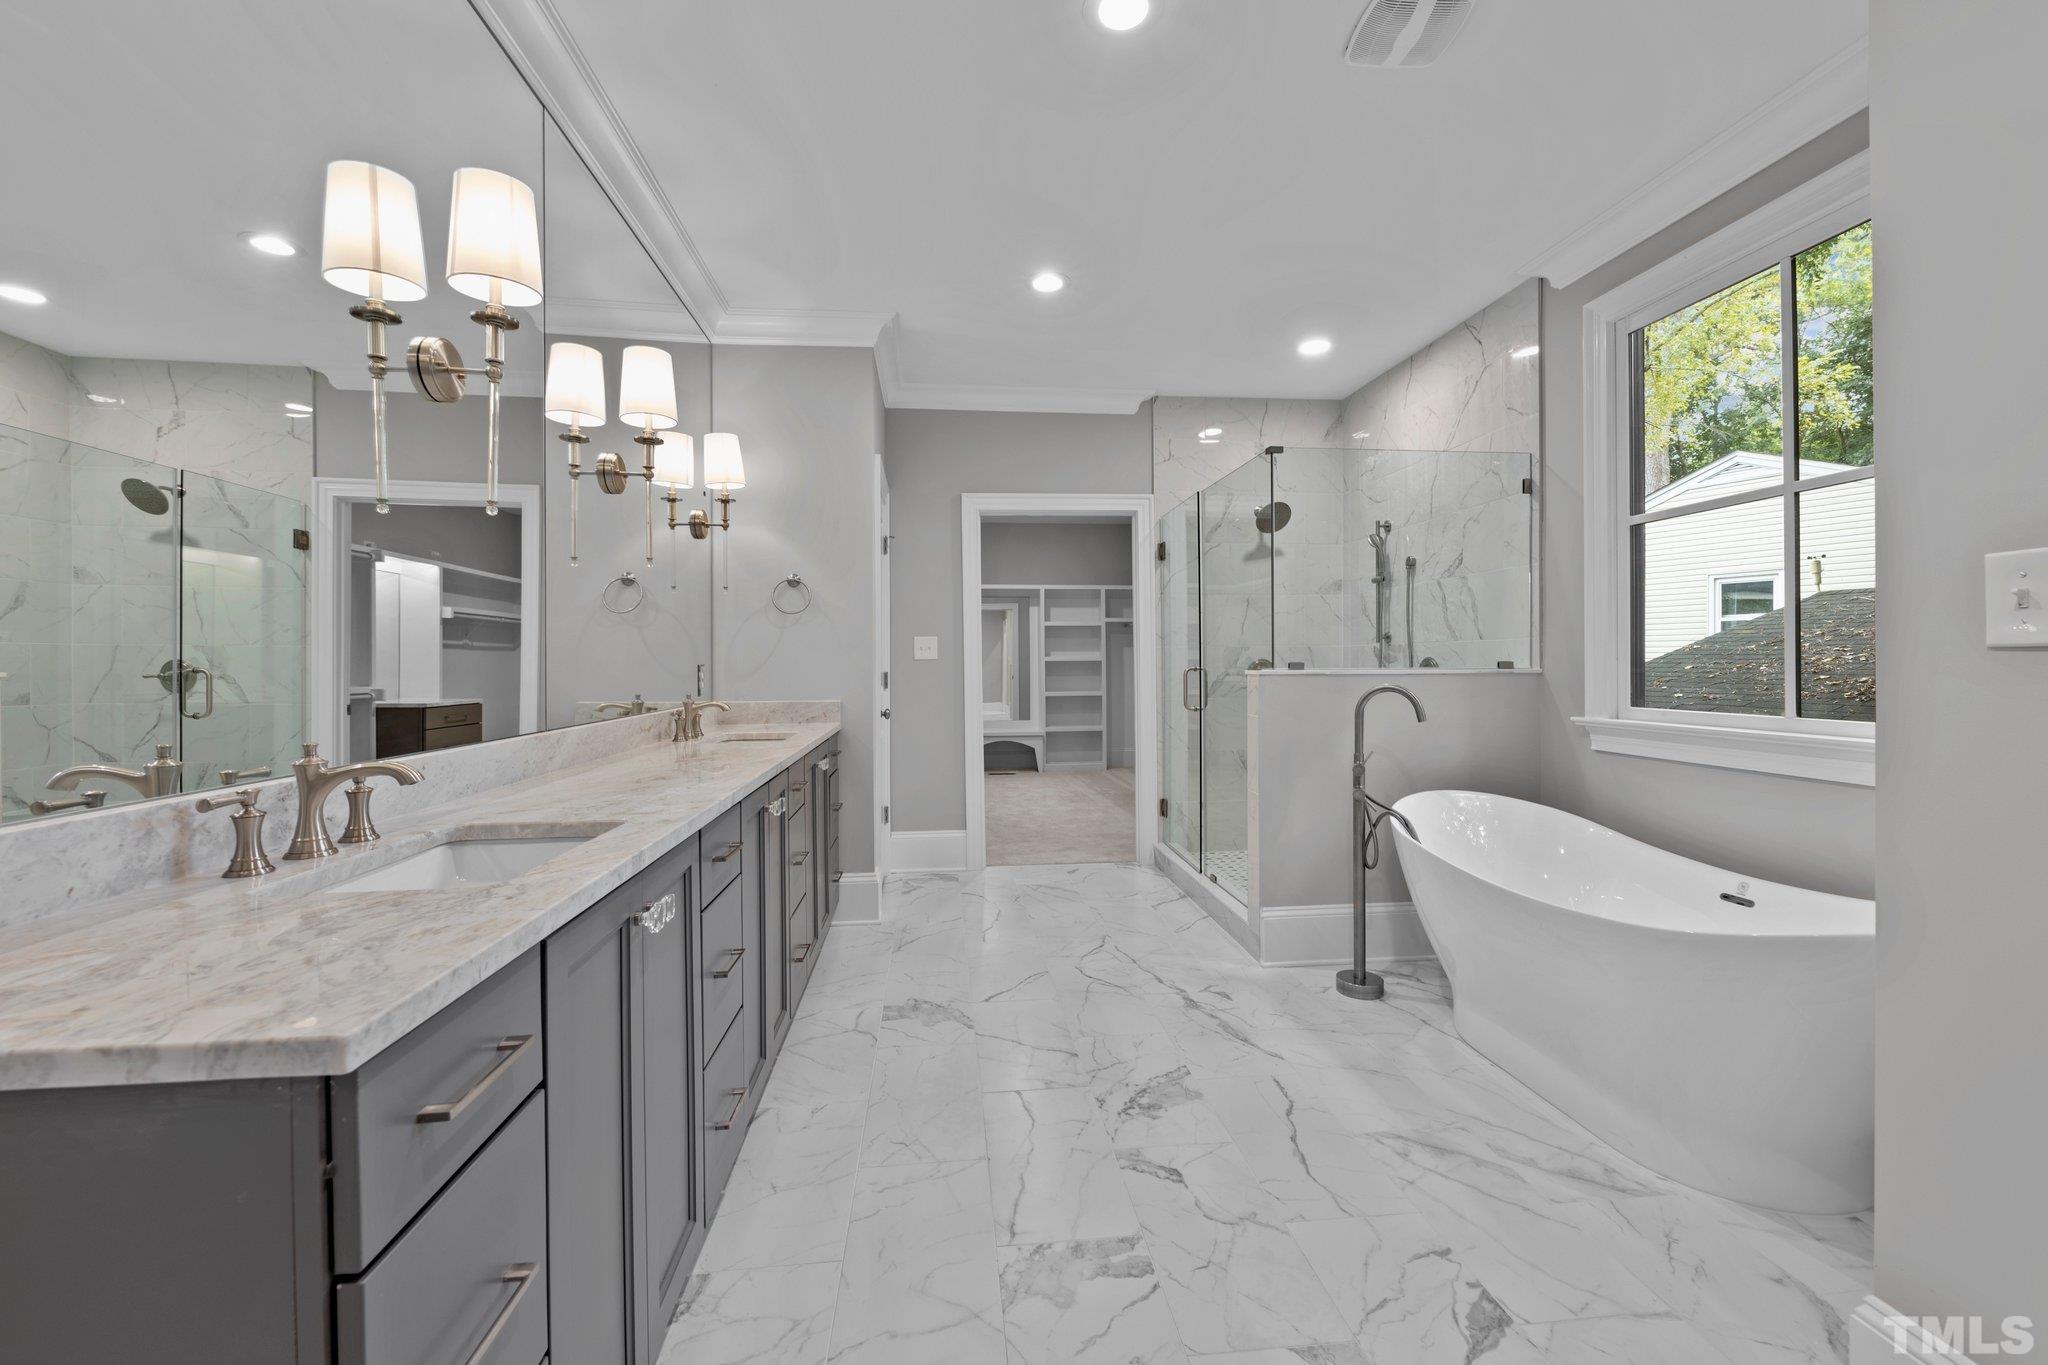 Luxurious master bathroom spa featuring dual vanities with quartzite counter top, large garden tub, walk-in shower with marbled tiling to the ceiling and porcelain floor tiles.